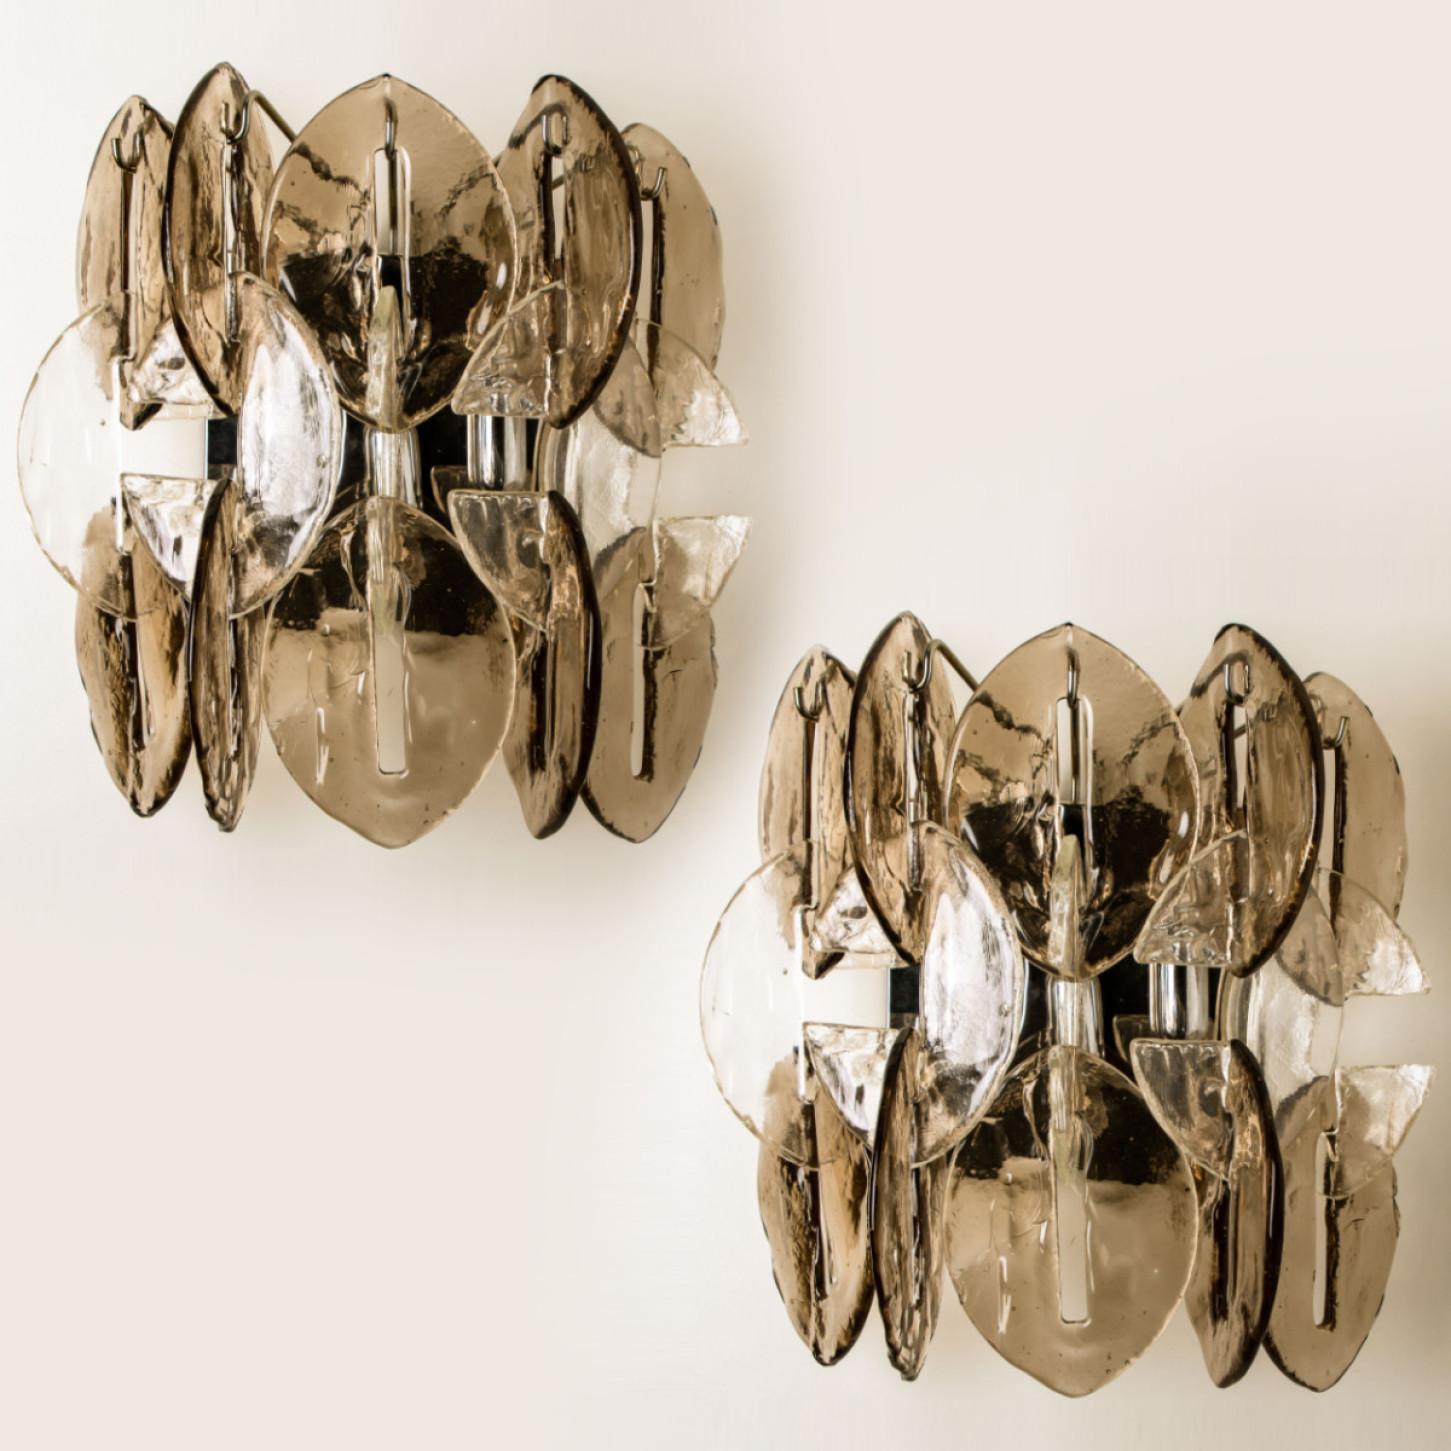 High-end and handmade chrome and glass wall lights made by Kalmar in Austria, Europe around 1970. The light consists of 14 glass discs, in both clear and smoked glass. The discs are hung on a chrome frame. These lights are executed to a very high